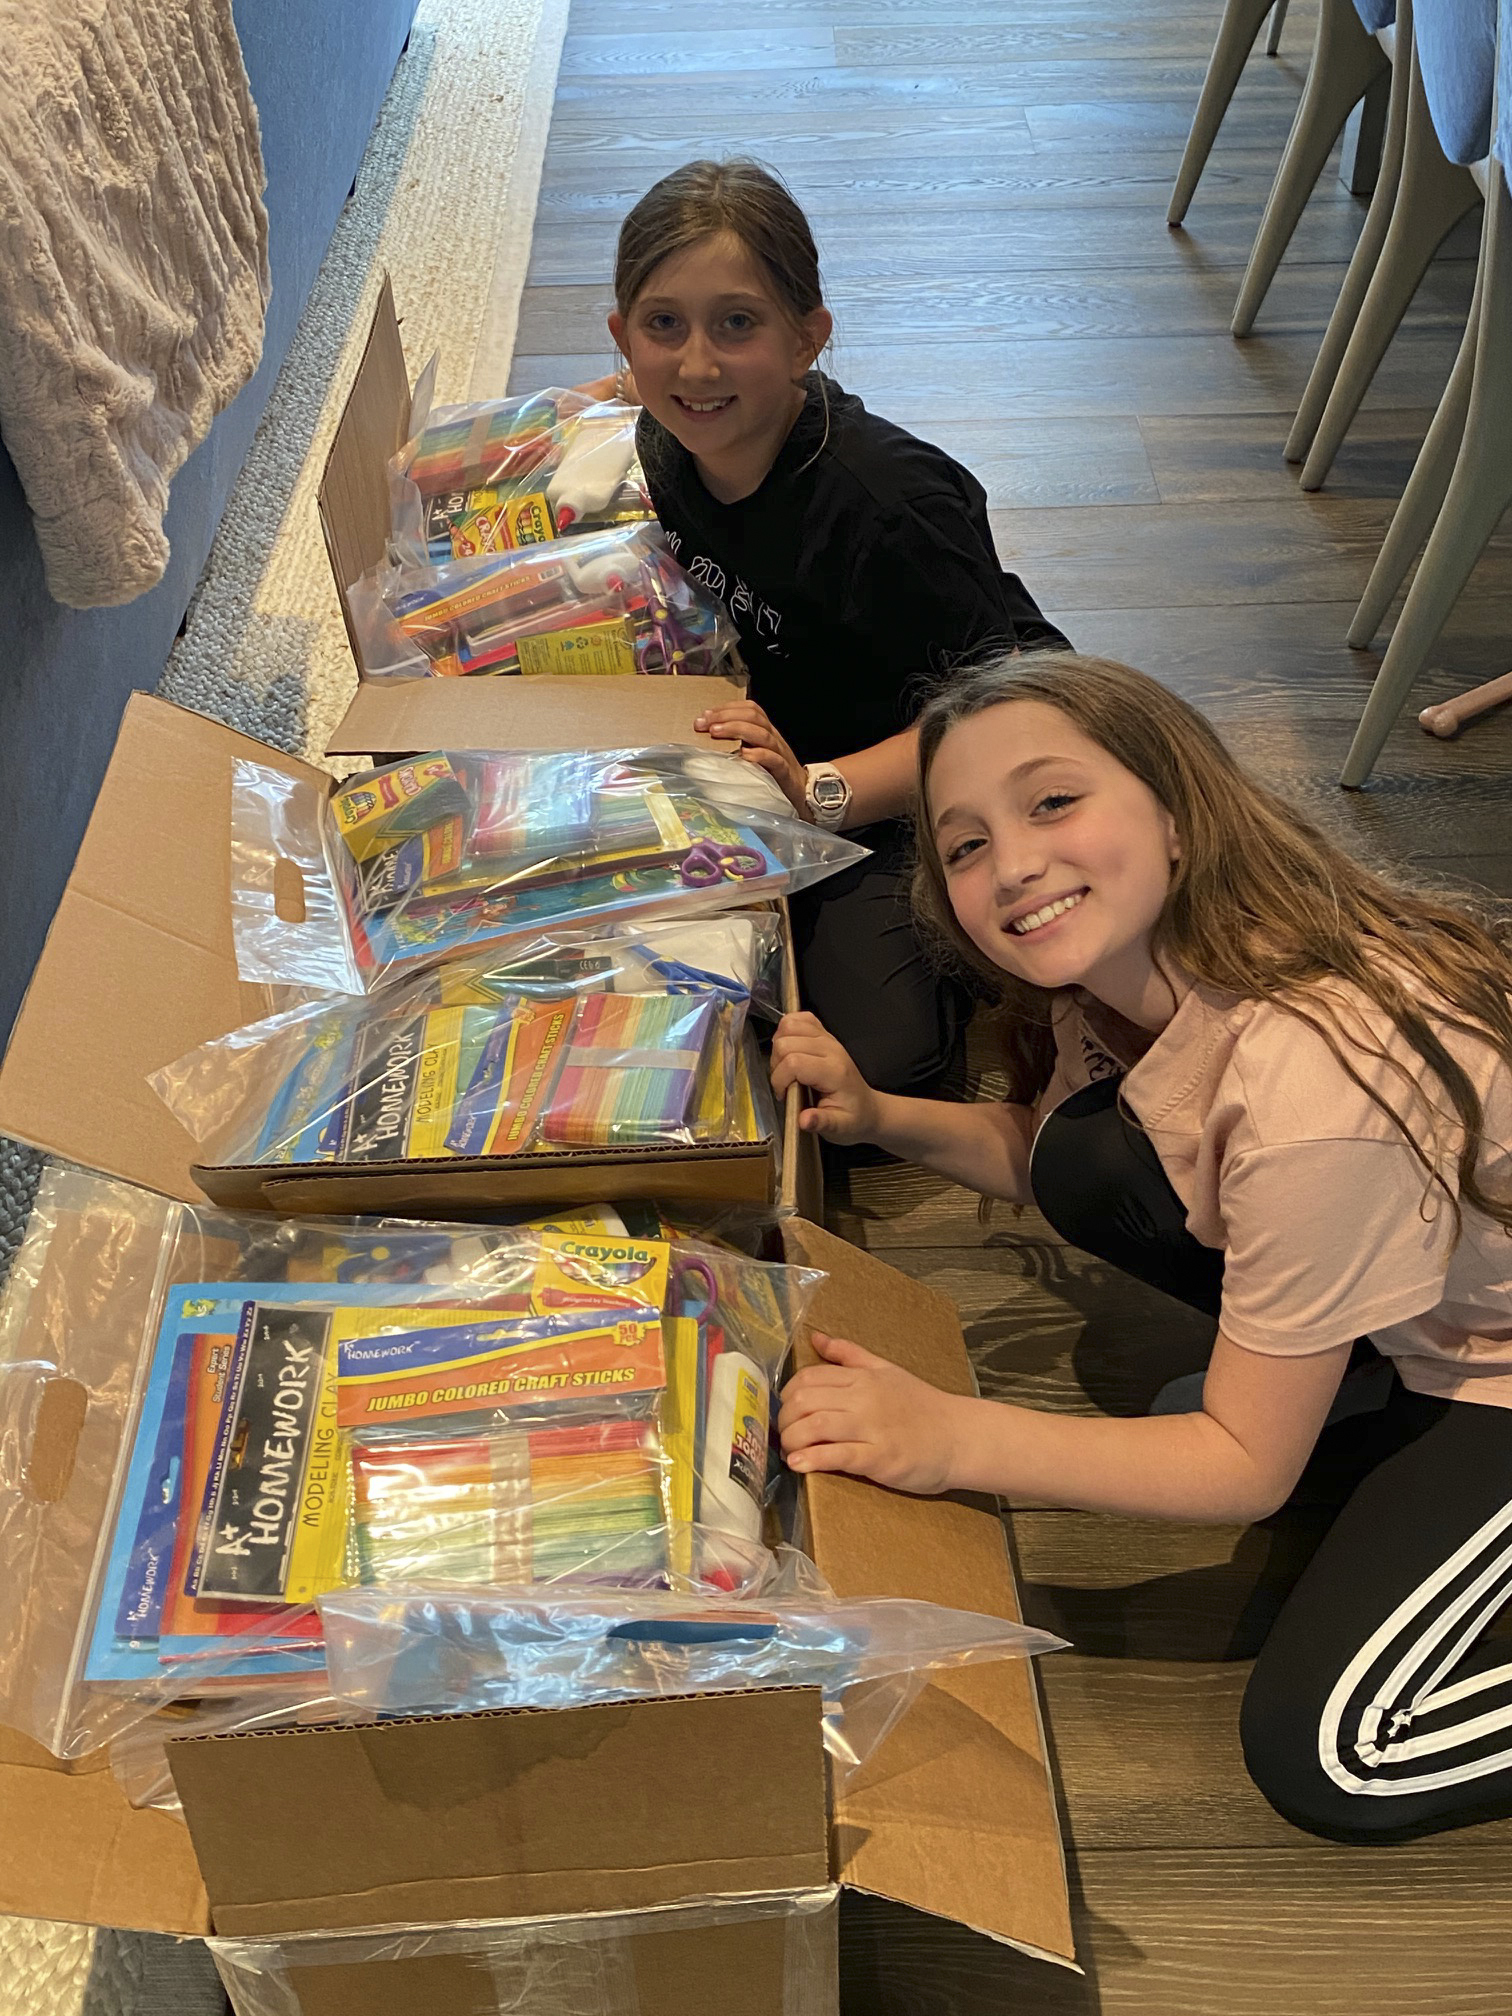 Liv and Zoe Kotler, joined Hamptons United founders  (and parents) Stacey and Kevin Kotler in assembling art kits for Tuckahoe School students. On June 5, they delivered 30 kits and this week plan to provide another 110. Created in response to the COVID-19 pandemic, since April, Hamptons United has raised over $120,000 to assist those in need. 